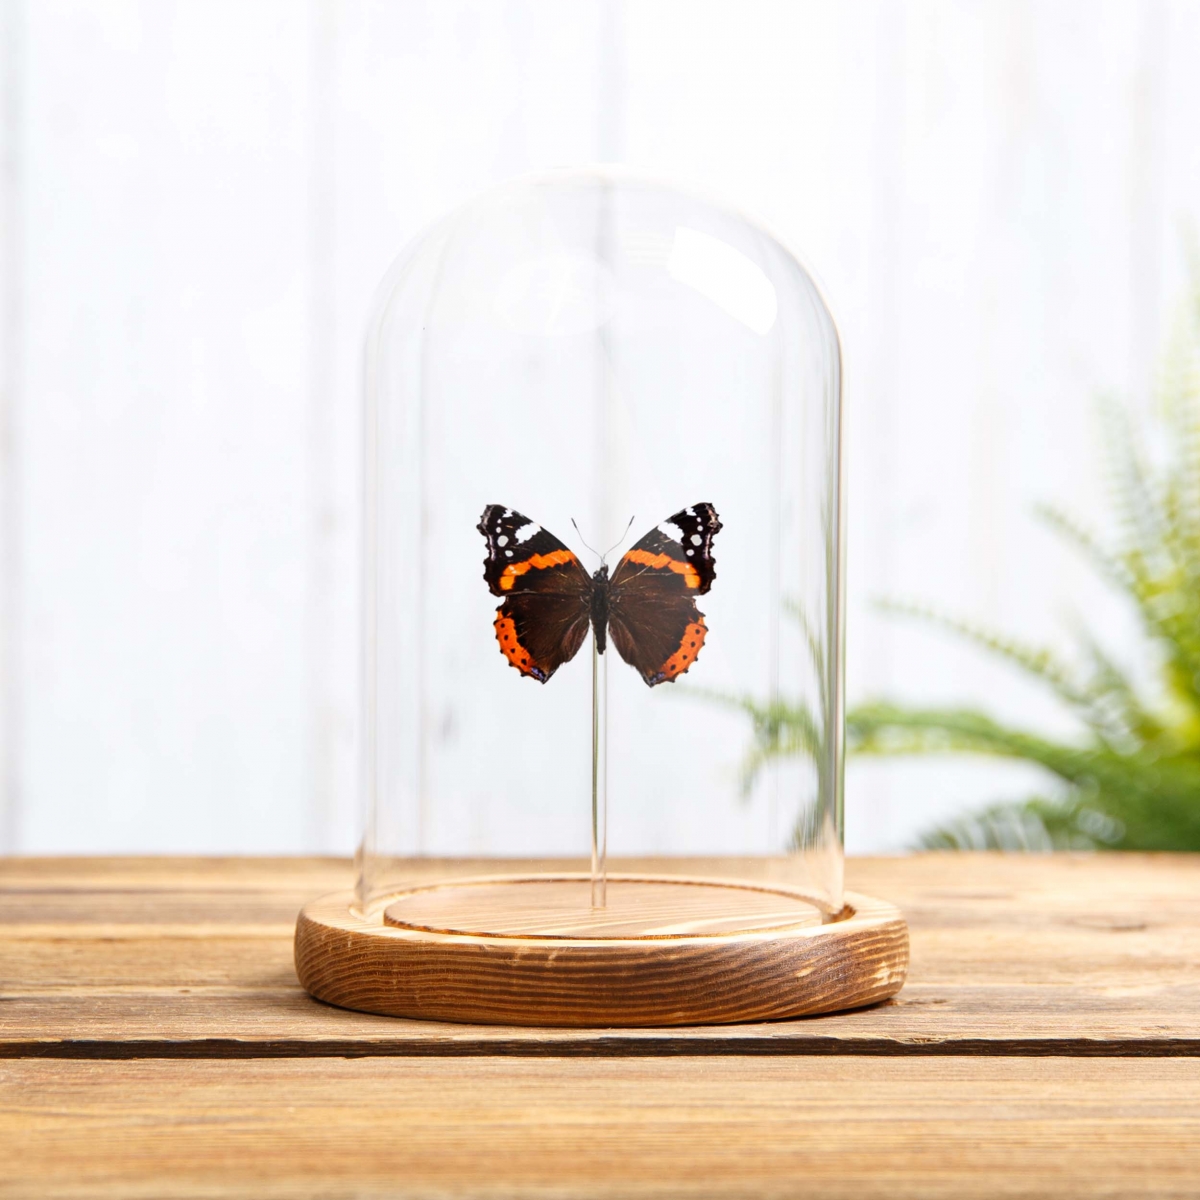 The Red Admiral in Glass Dome with Wooden Base (Vanessa atalanta)